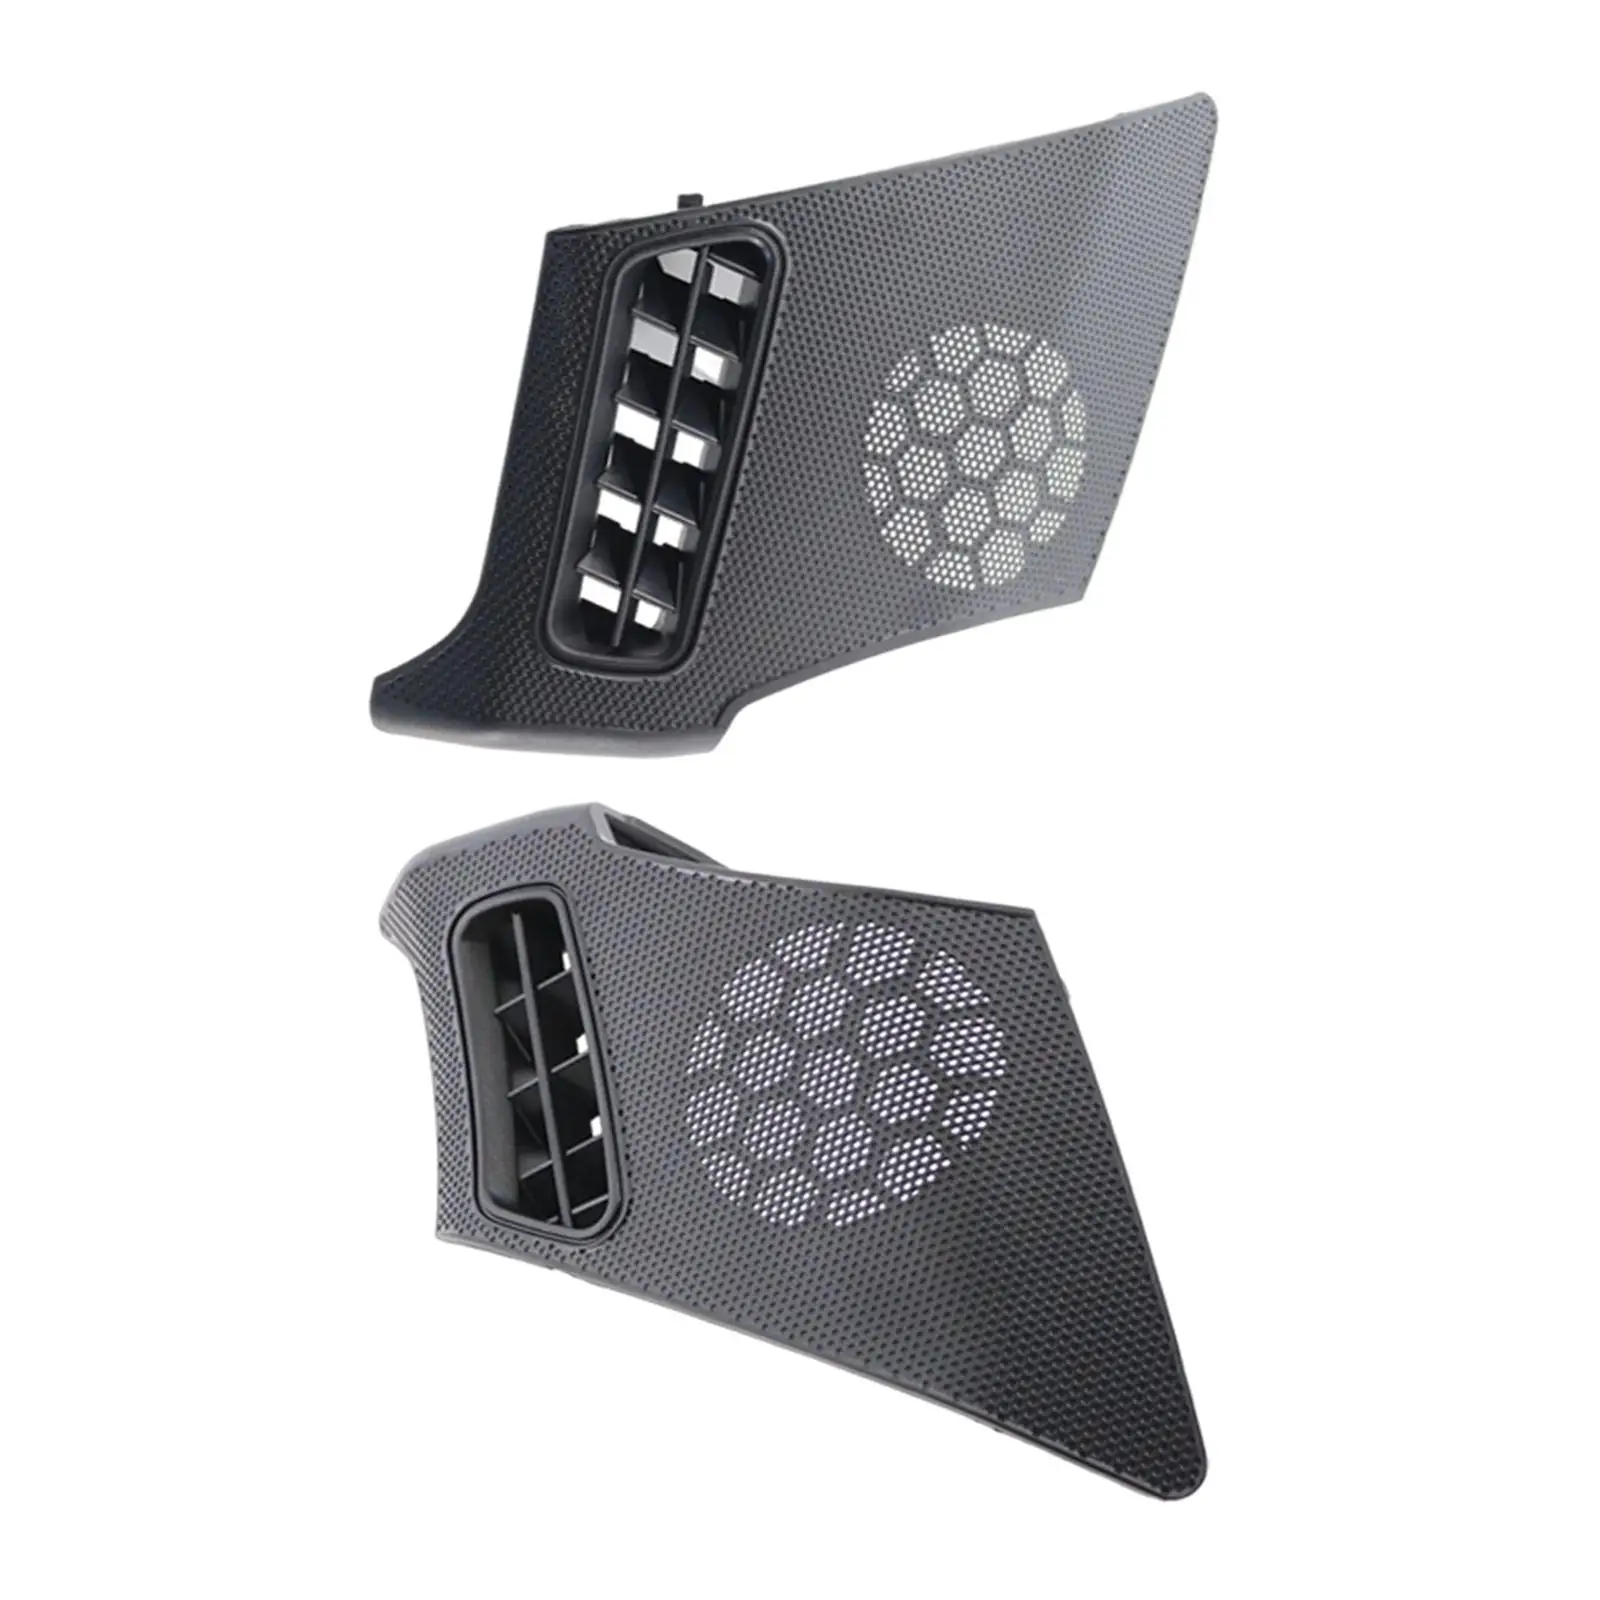 Speaker Grill Covers Protective Durable Parts Fits for car W210